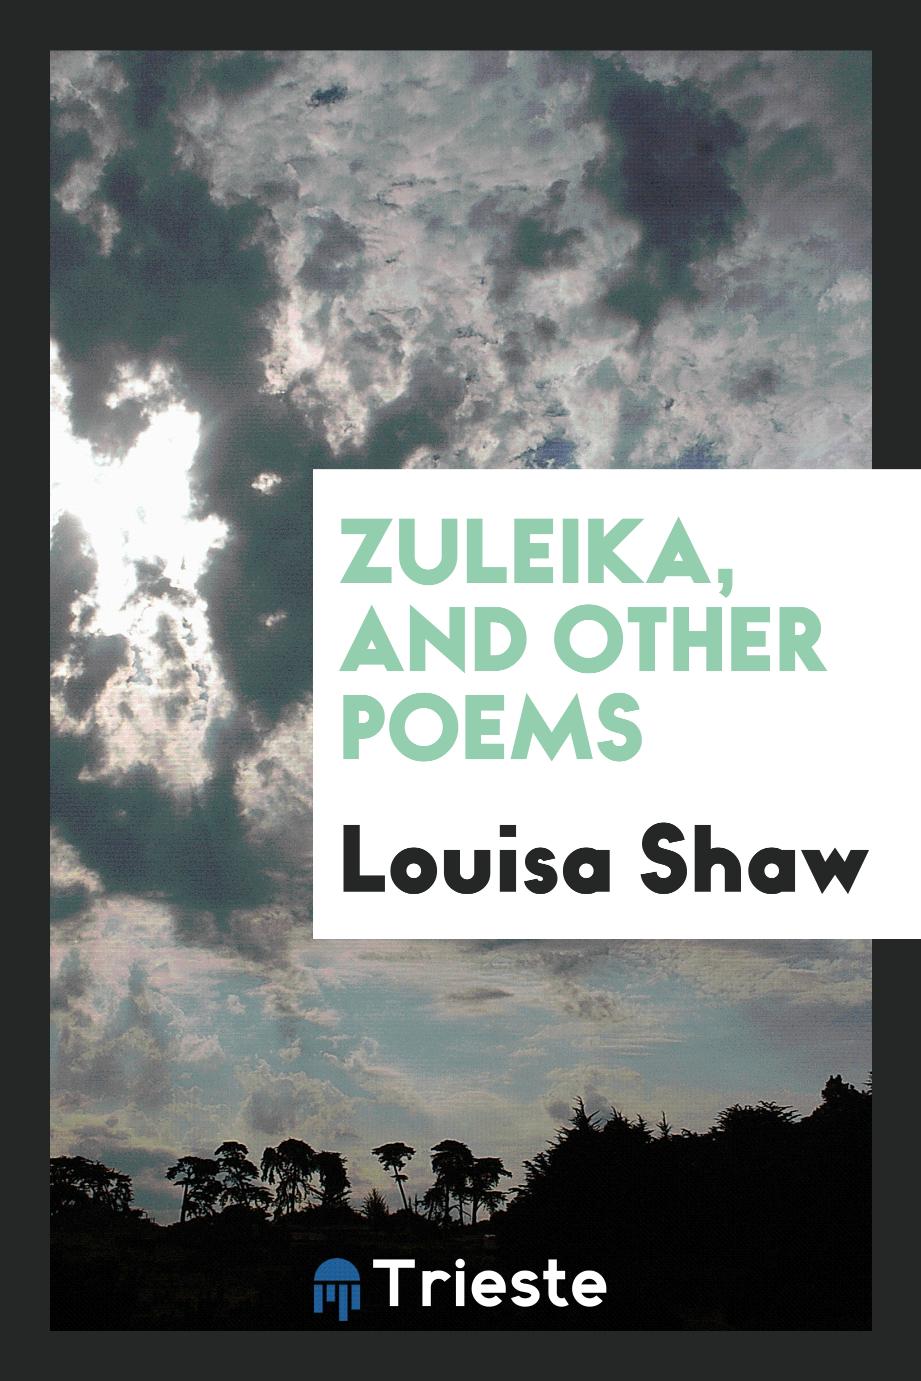 Zuleika, and Other Poems